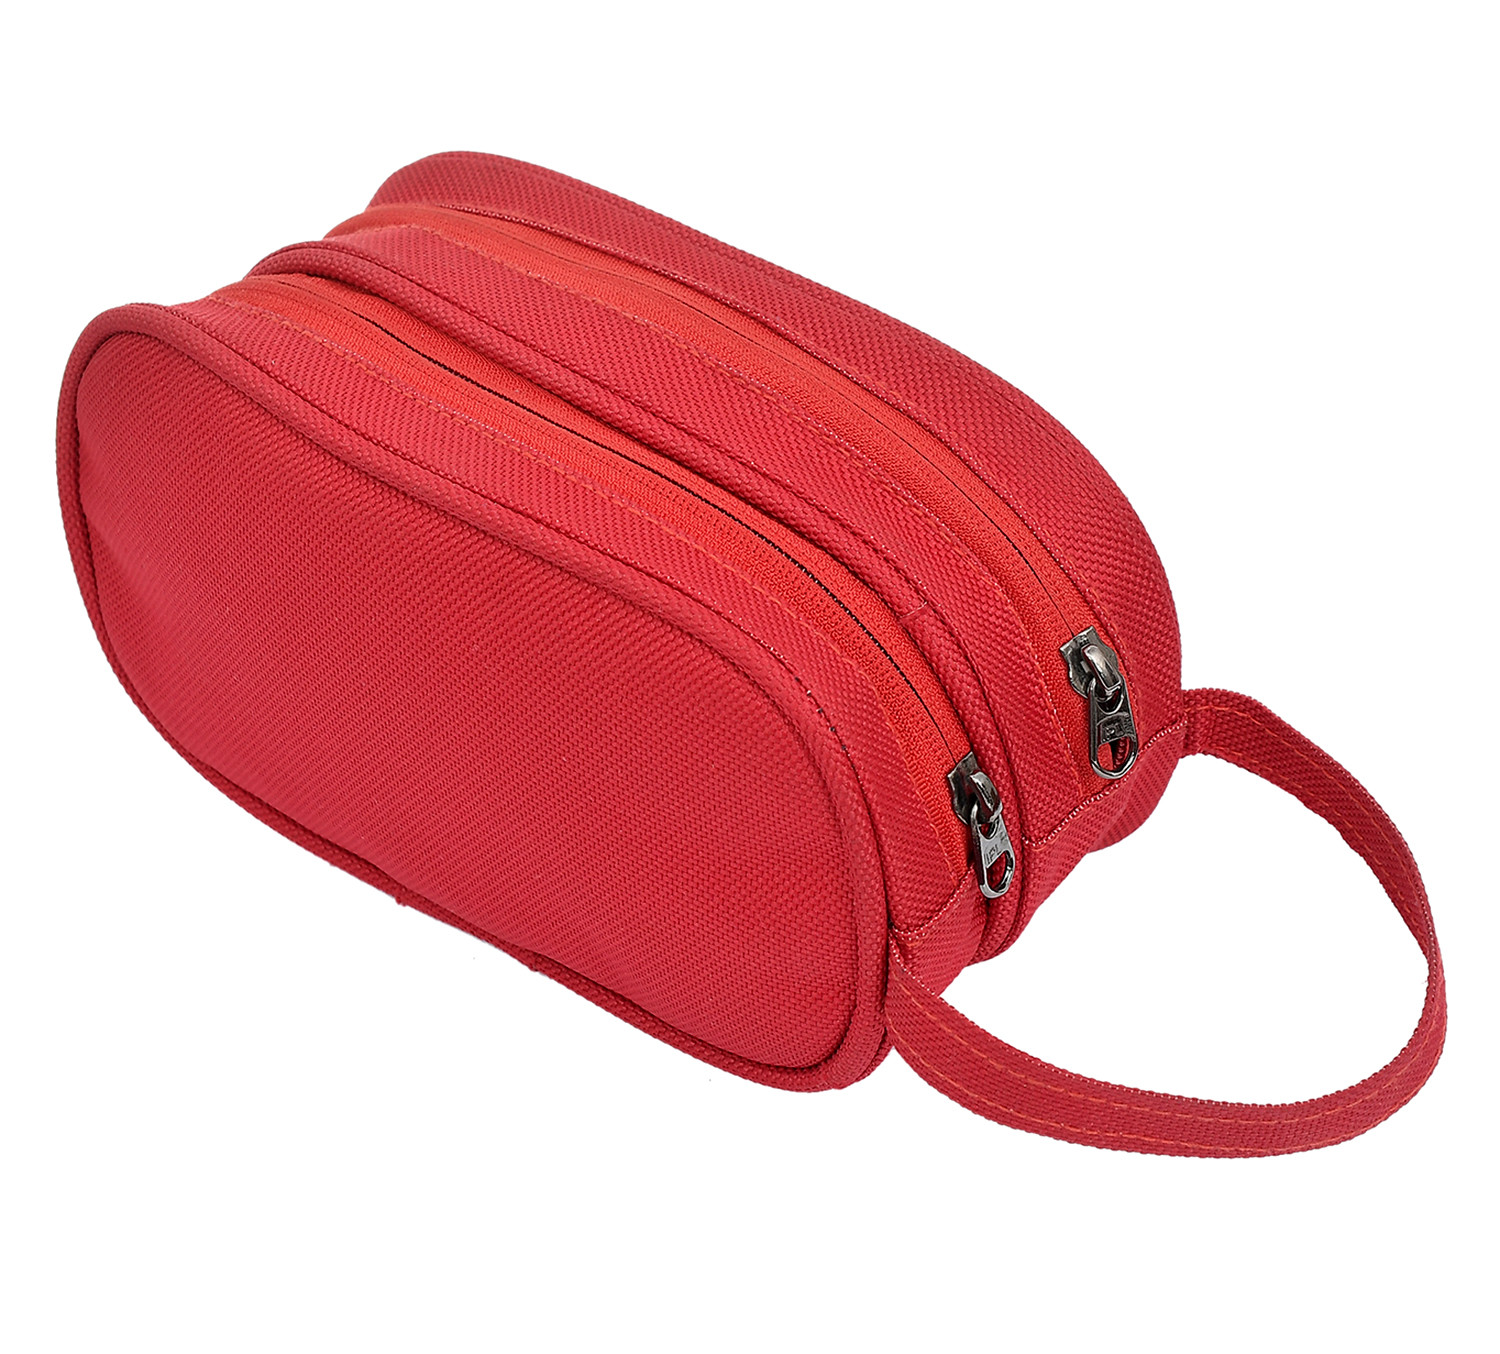 Kuber Industries Multiuses Rexine Travel Toilerty bag/Shaving Kit/Dopp Kit/Cosmetic Bag With 3 Zipper Comparments & Carrying Strip (Red)